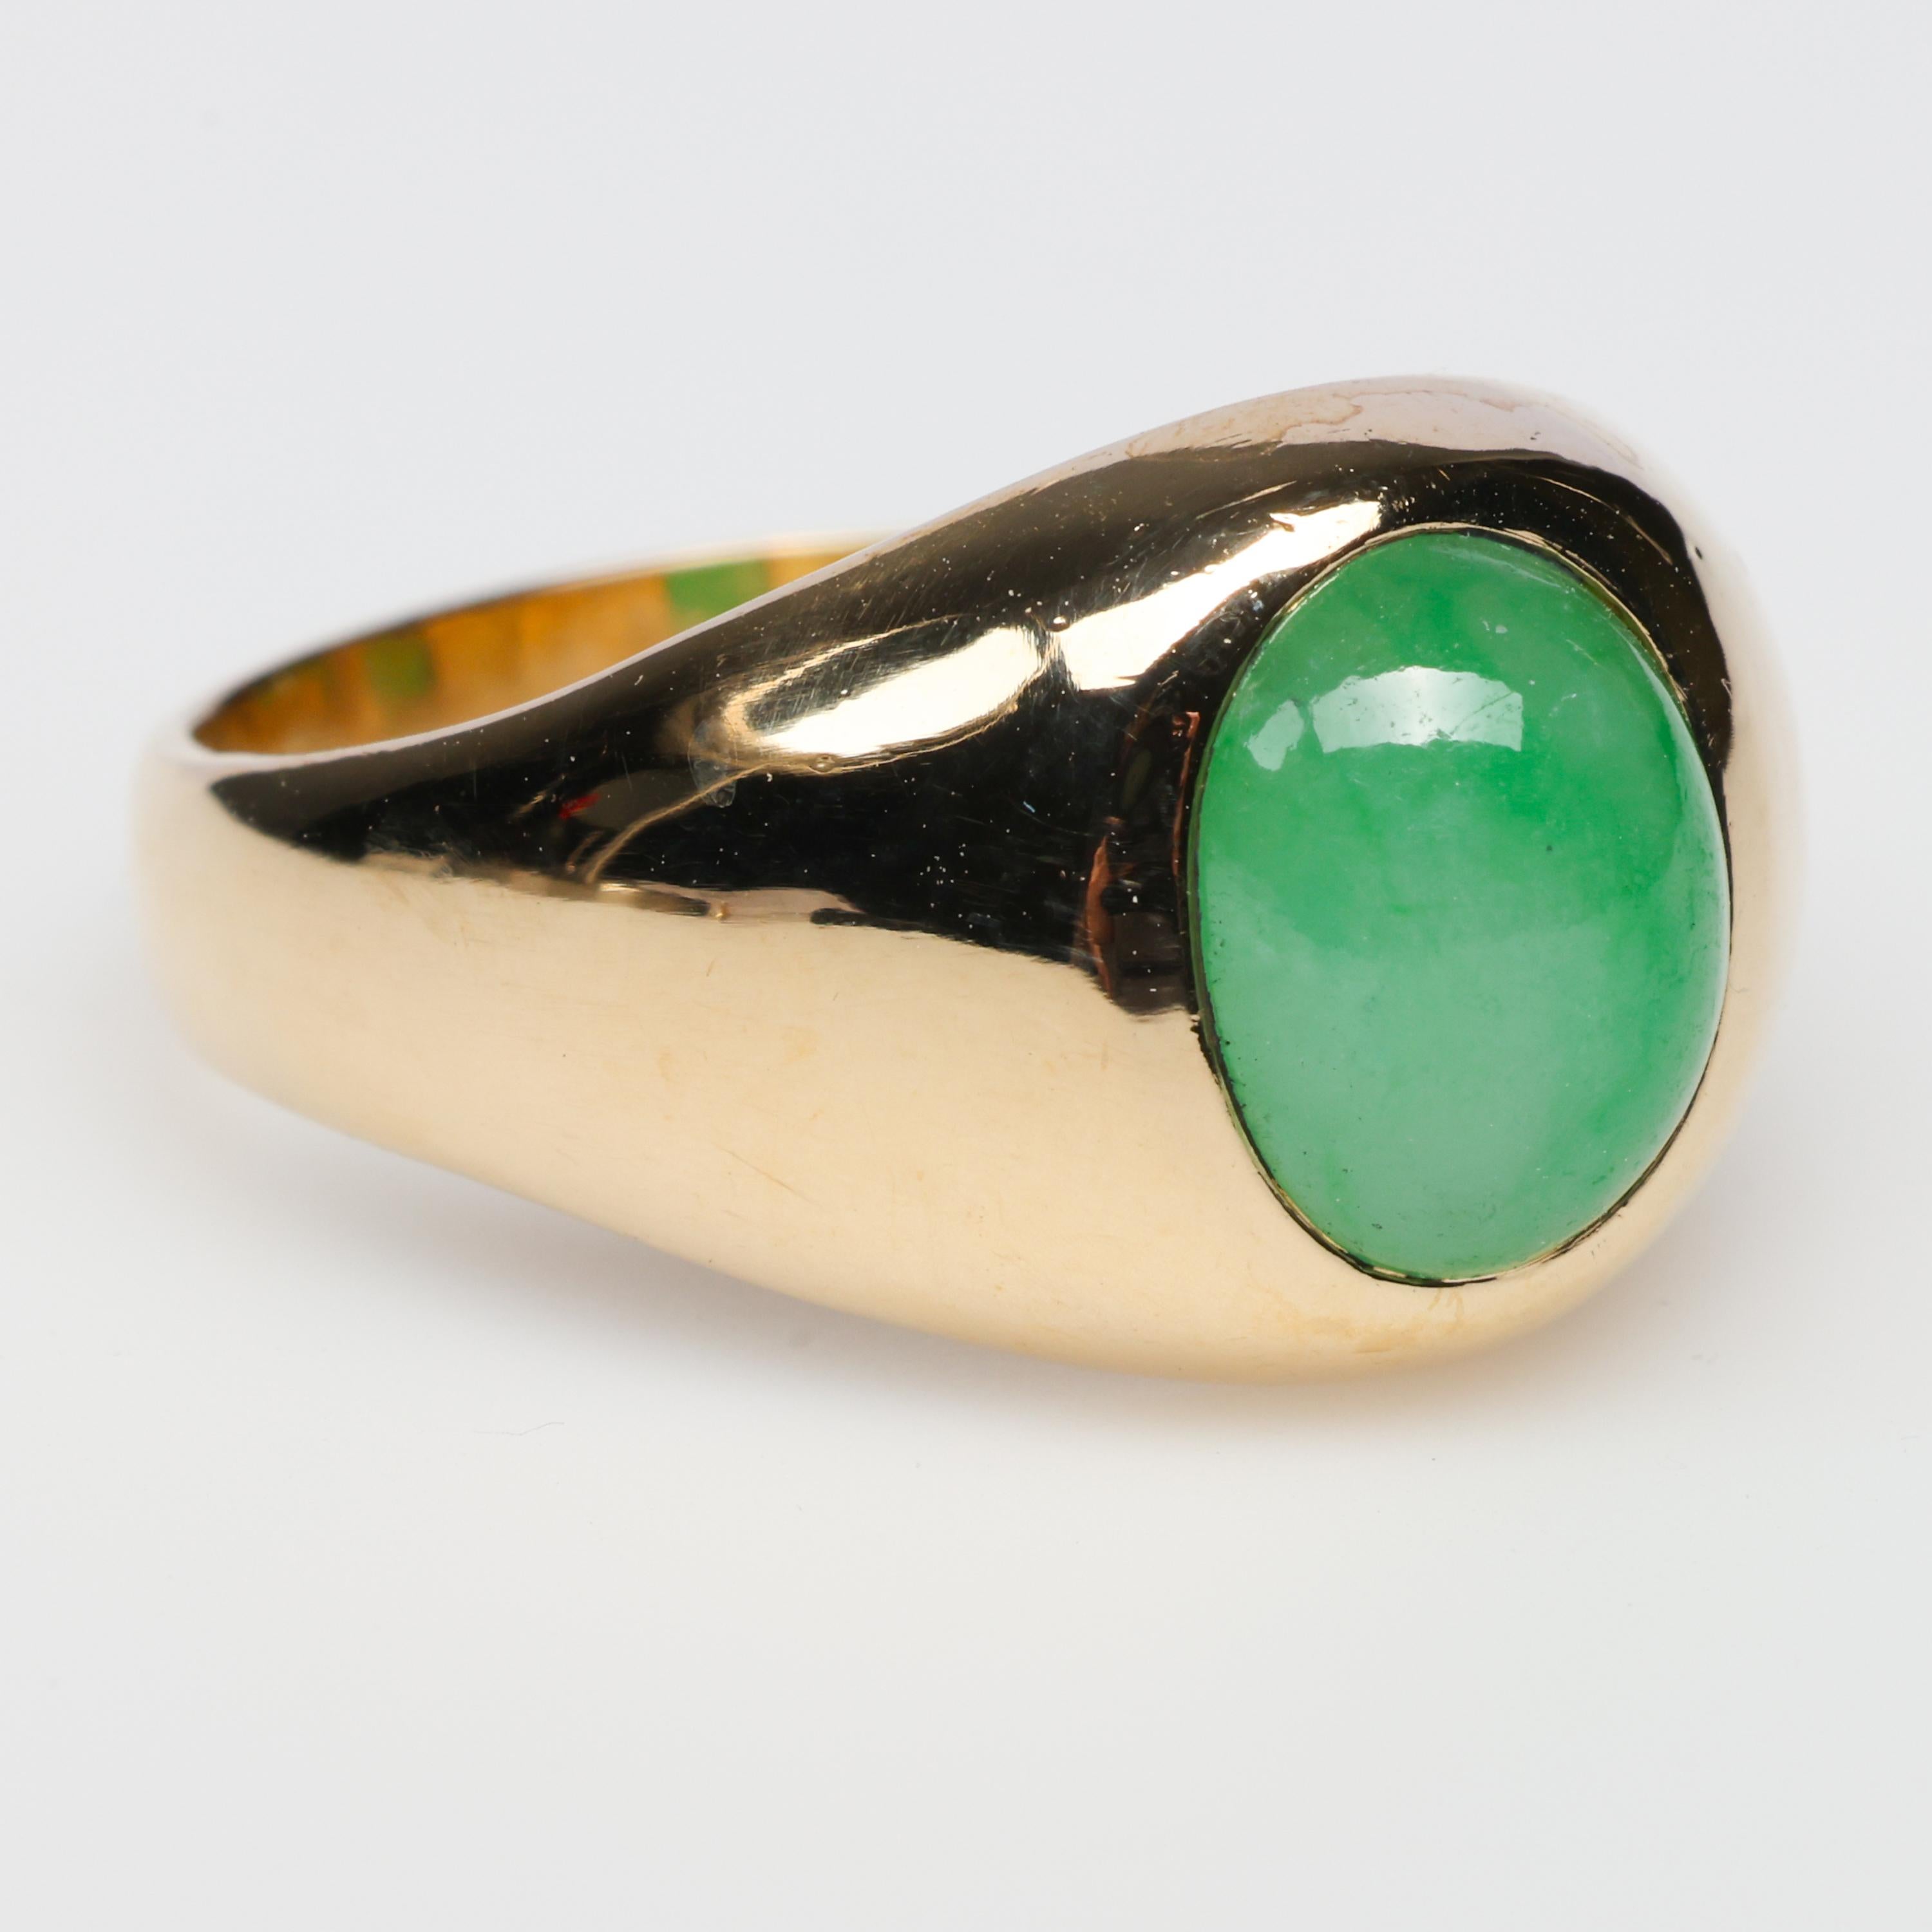 This antique 14K yellow gold ring features a bright green cabochon of natural and untreated apple green jadeite jade.  Tye stone measures 8.8 x 7.5 x 3.92mm and is translucent and slightly mottled. The classic styling of this ring is the 1920s